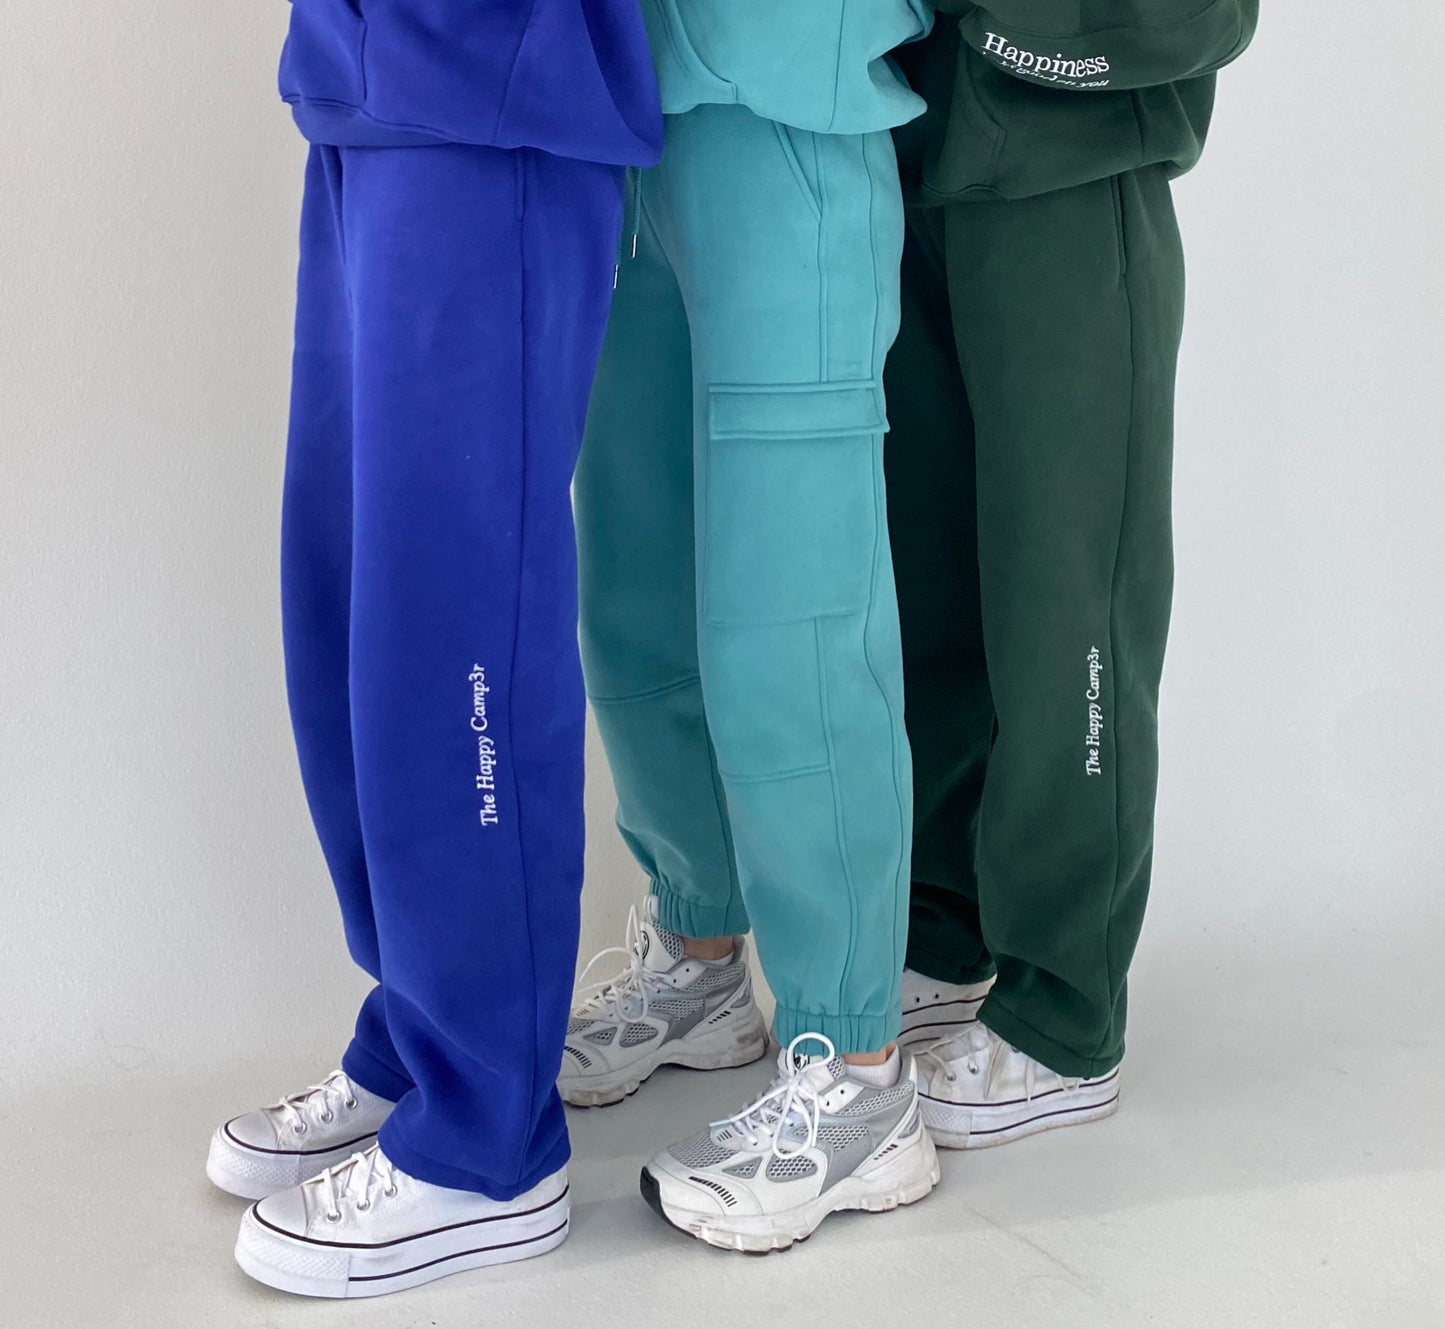 Happiness Sweatpants - Forest Green